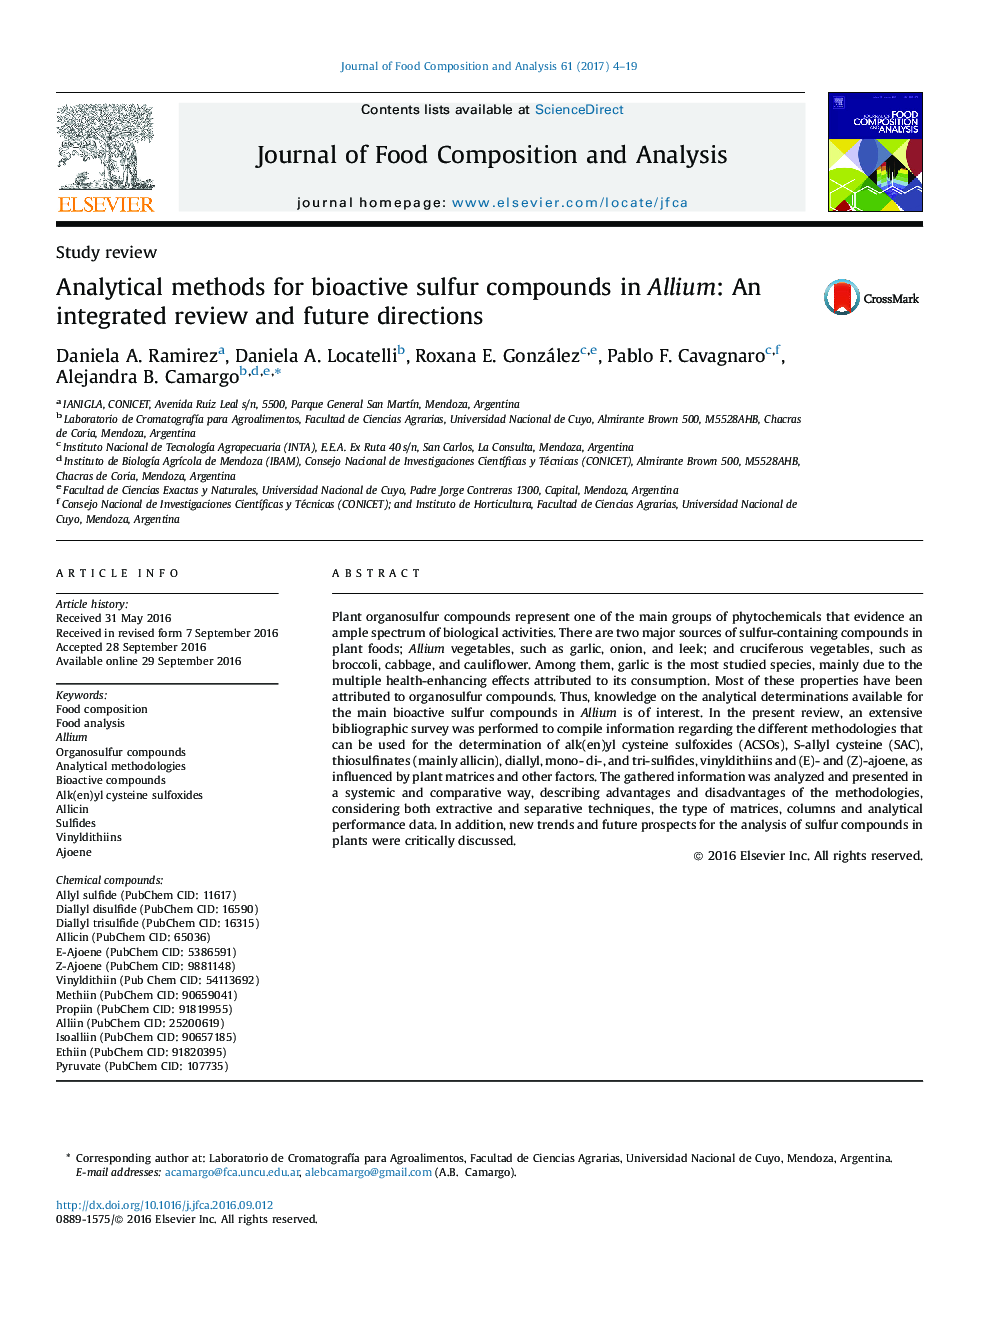 Study reviewAnalytical methods for bioactive sulfur compounds in Allium: An integrated review and future directions